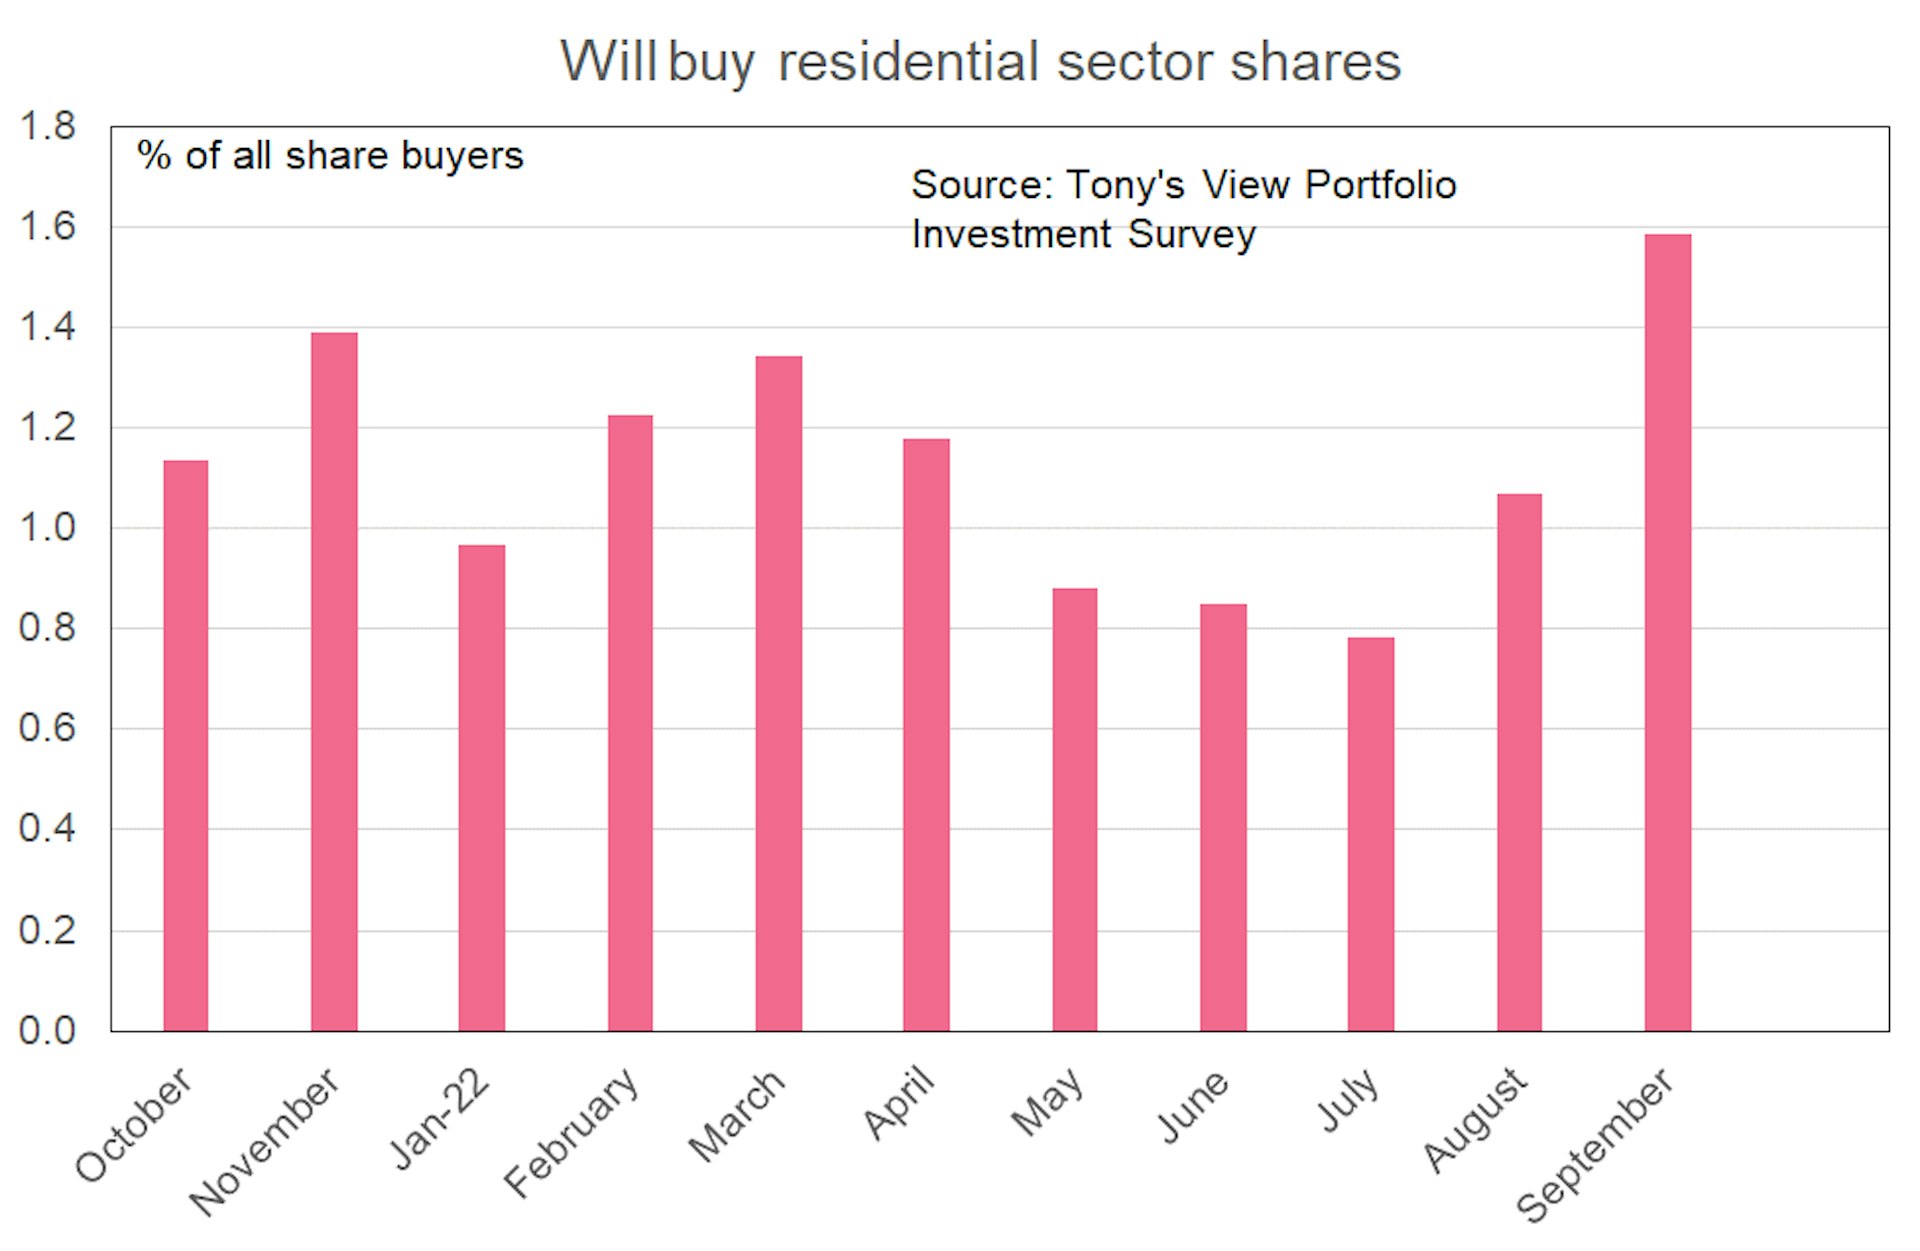 Bar graph showing willingness to buy residential sector shares growing fast, from just under 0.8% of all share buyers in July to just under 1.6% of all share buyers in September.